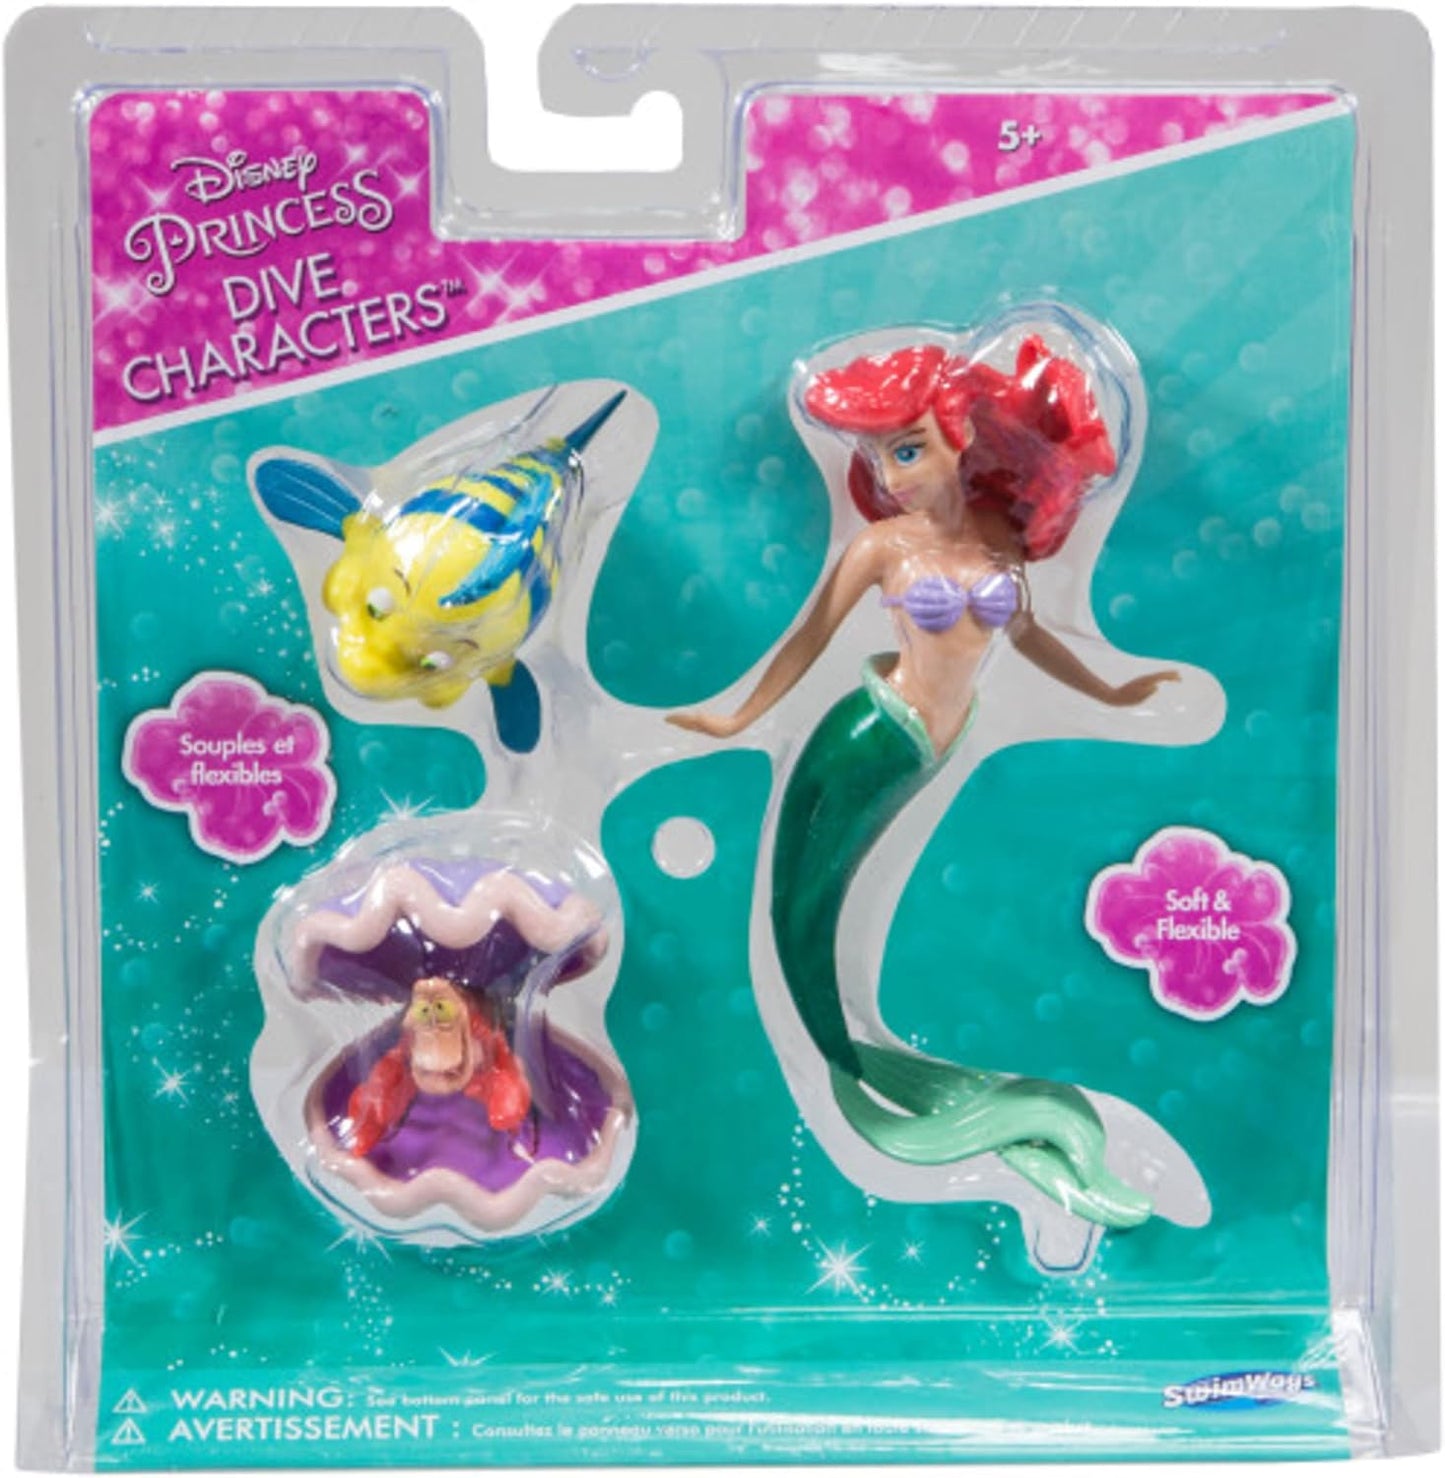 Little Mermaid Disney Dive Characters Kids Pool Toy- Princess Ariel, Flounder, and Sebastian, Bath Toys and Pool Party Supplies